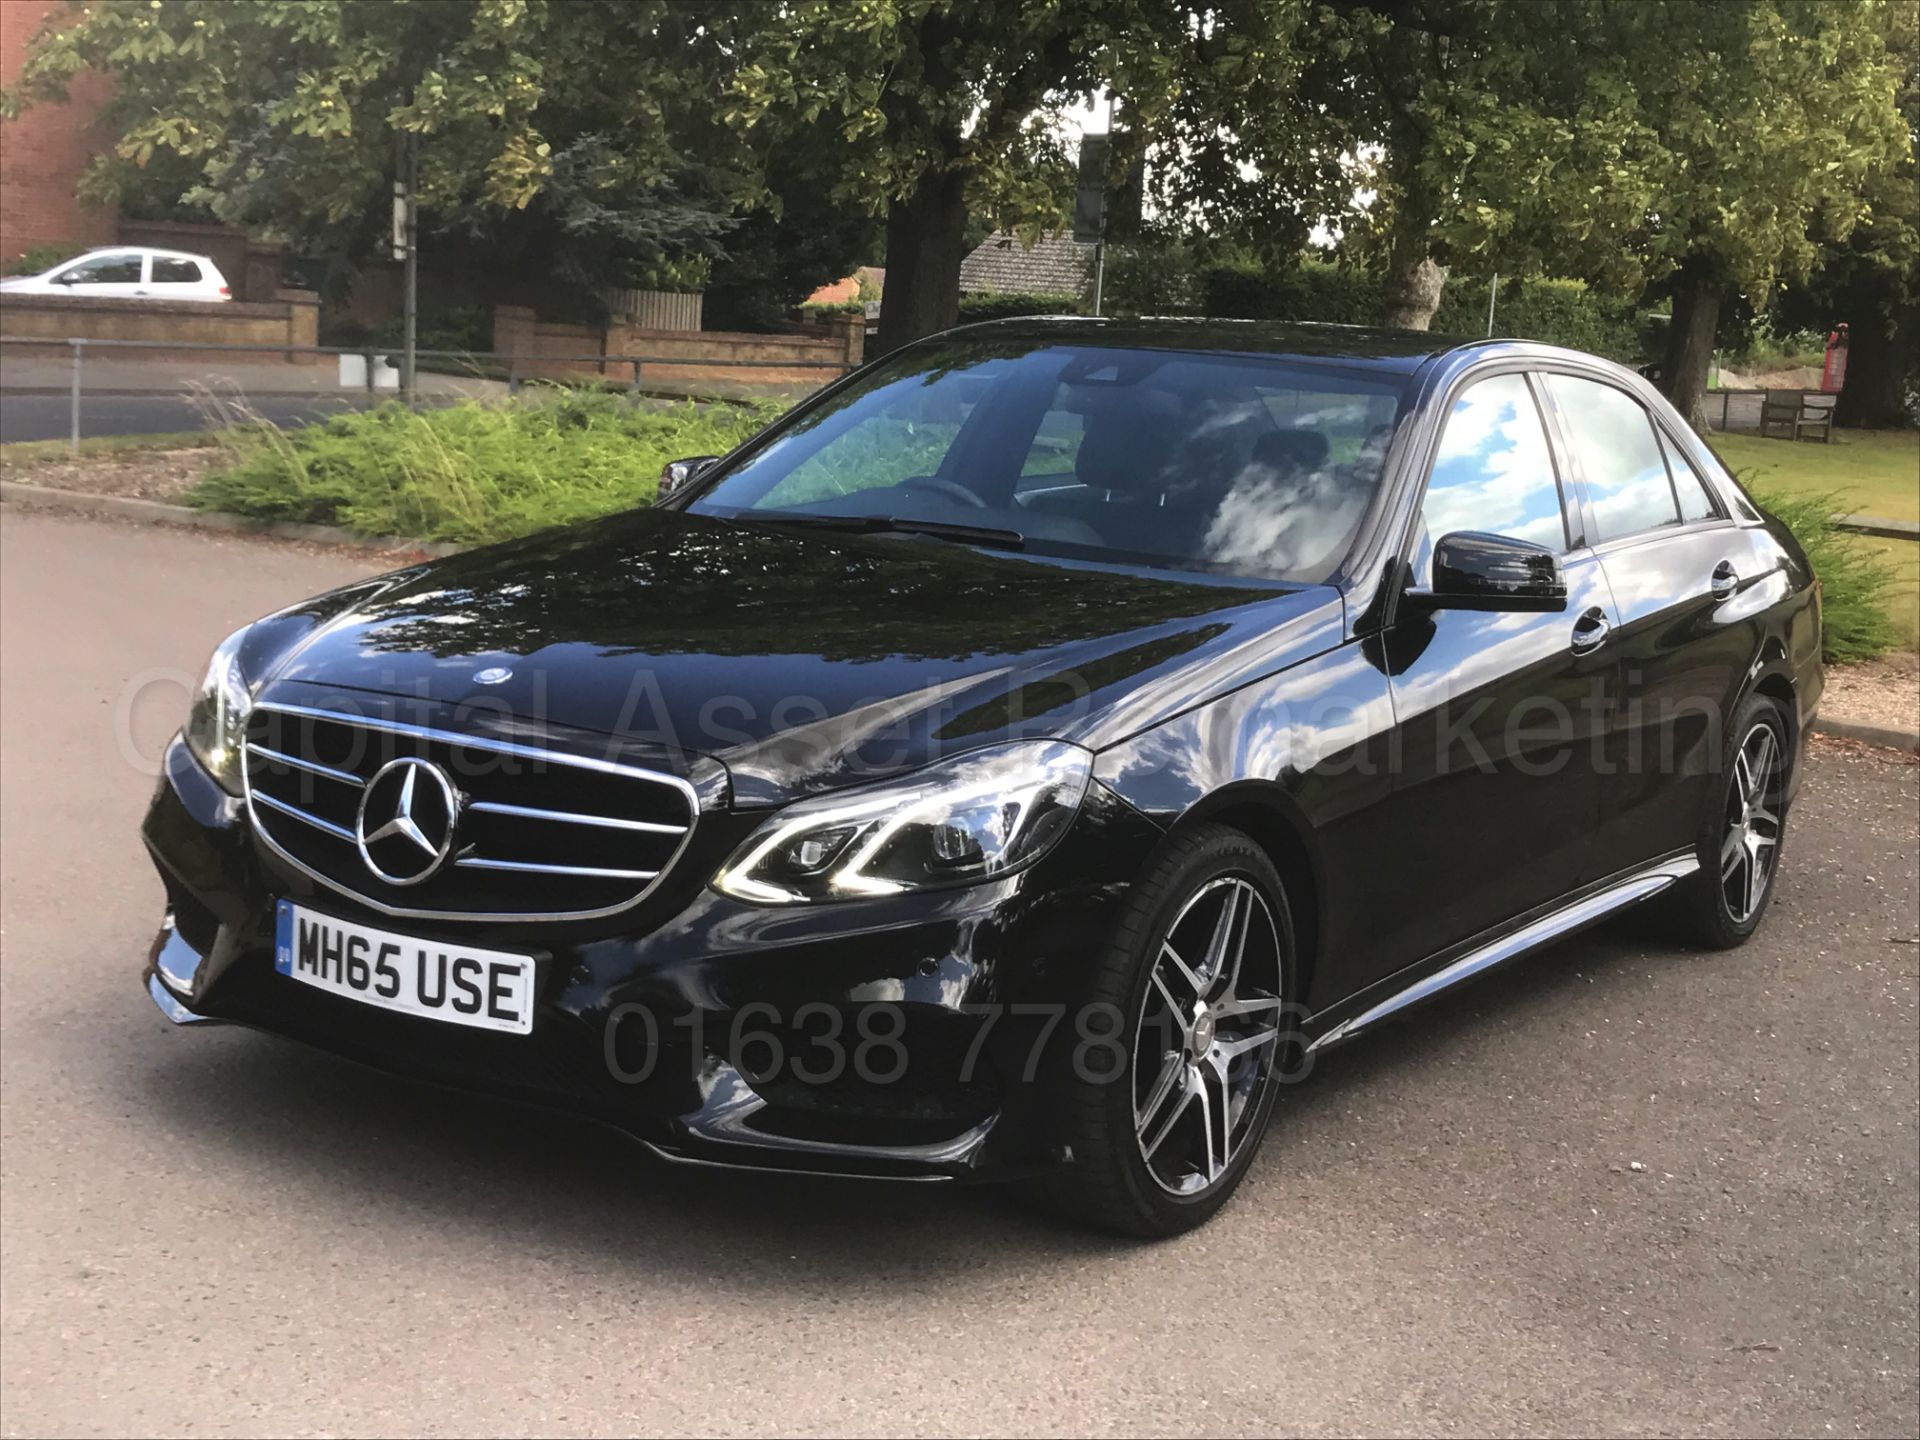 MERCEDES-BENZ E220D *AMG - NIGHT EDITION* SALOON (2016) '7G AUTO - LEATHER - SAT NAV' *LOW MILES* - Image 2 of 43